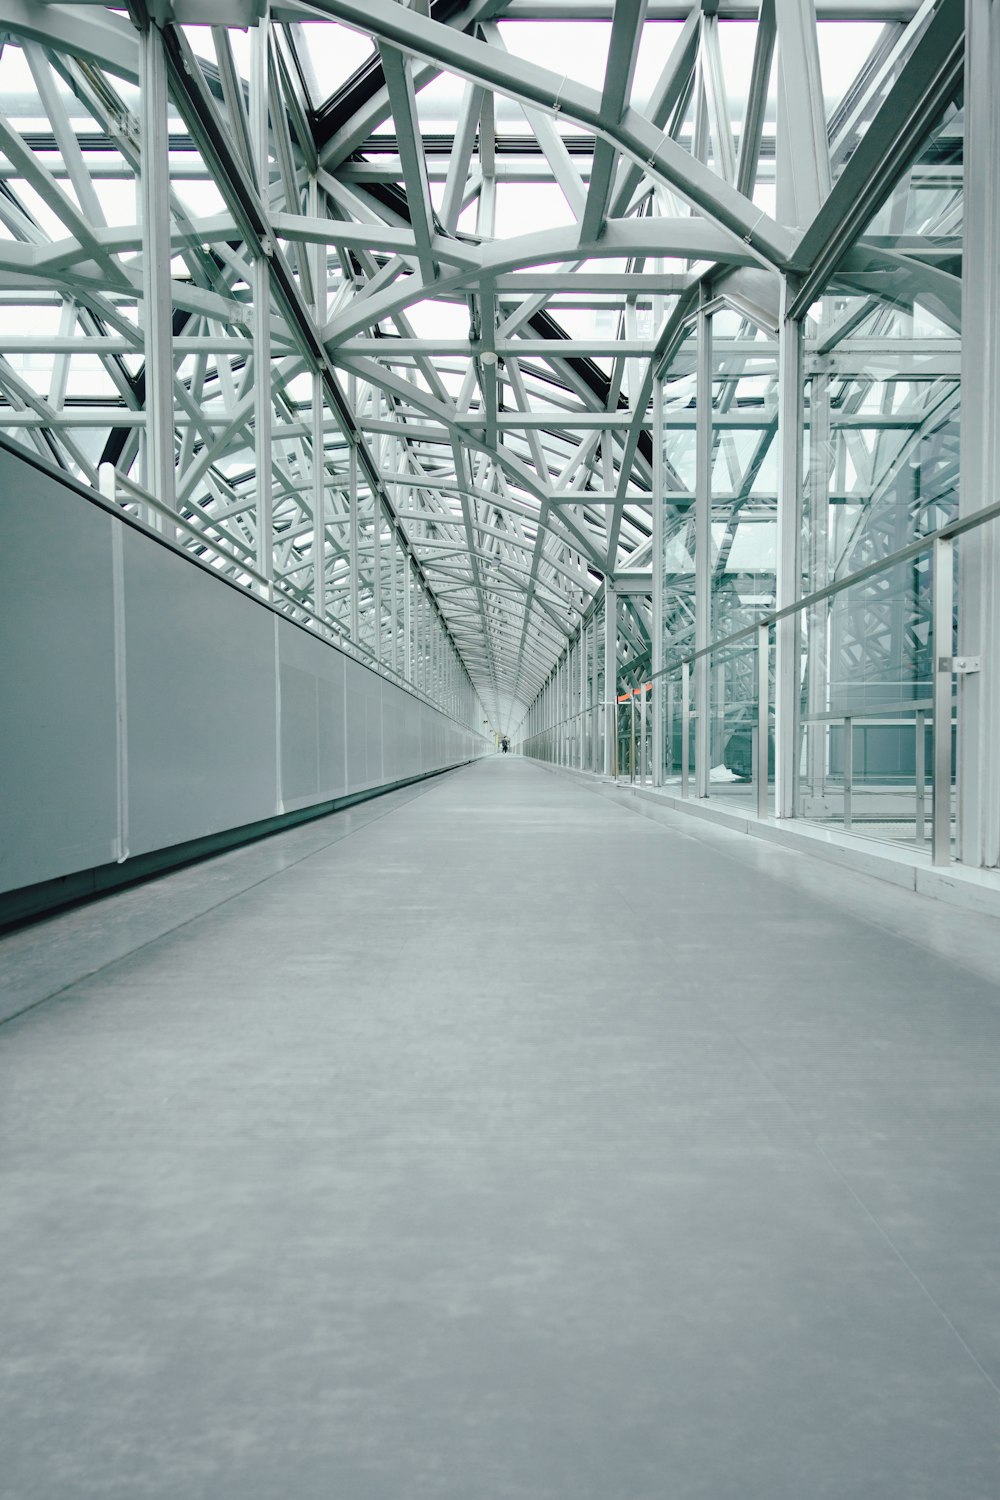 an empty walkway in a large building with lots of windows